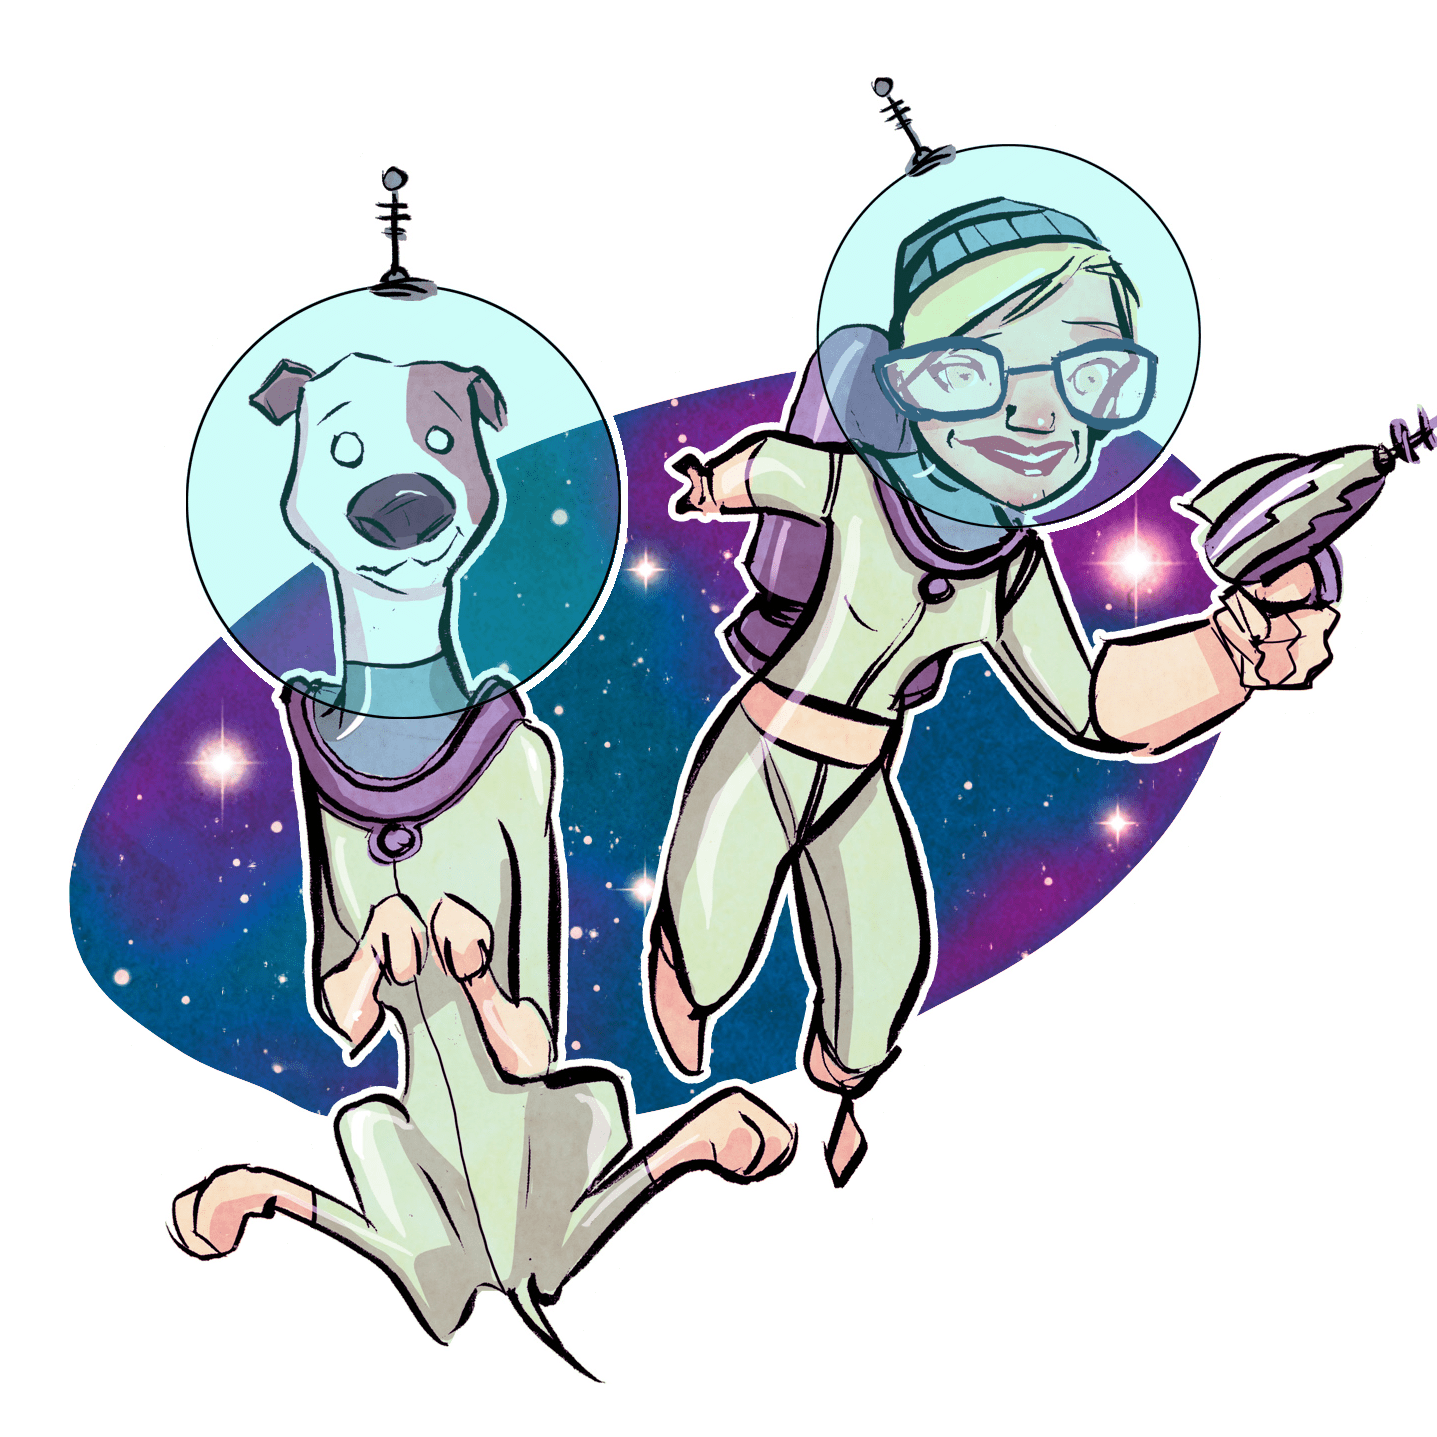 A cartoon drawing of a dog and a woman in space suits. Both spacesuits are a cream colour ith purple accents and the helmets look like clear bubbles of glass. The dog, Astro, has a silly expression with a slight smile. He is white with one brown ear and a brown path over the other ear and eye. The woman, Dr Laura Driessen, is blonde with blue glasses and a blue beanie. She’s holding what looks like a space-gun. The background is purply-blue with stars.